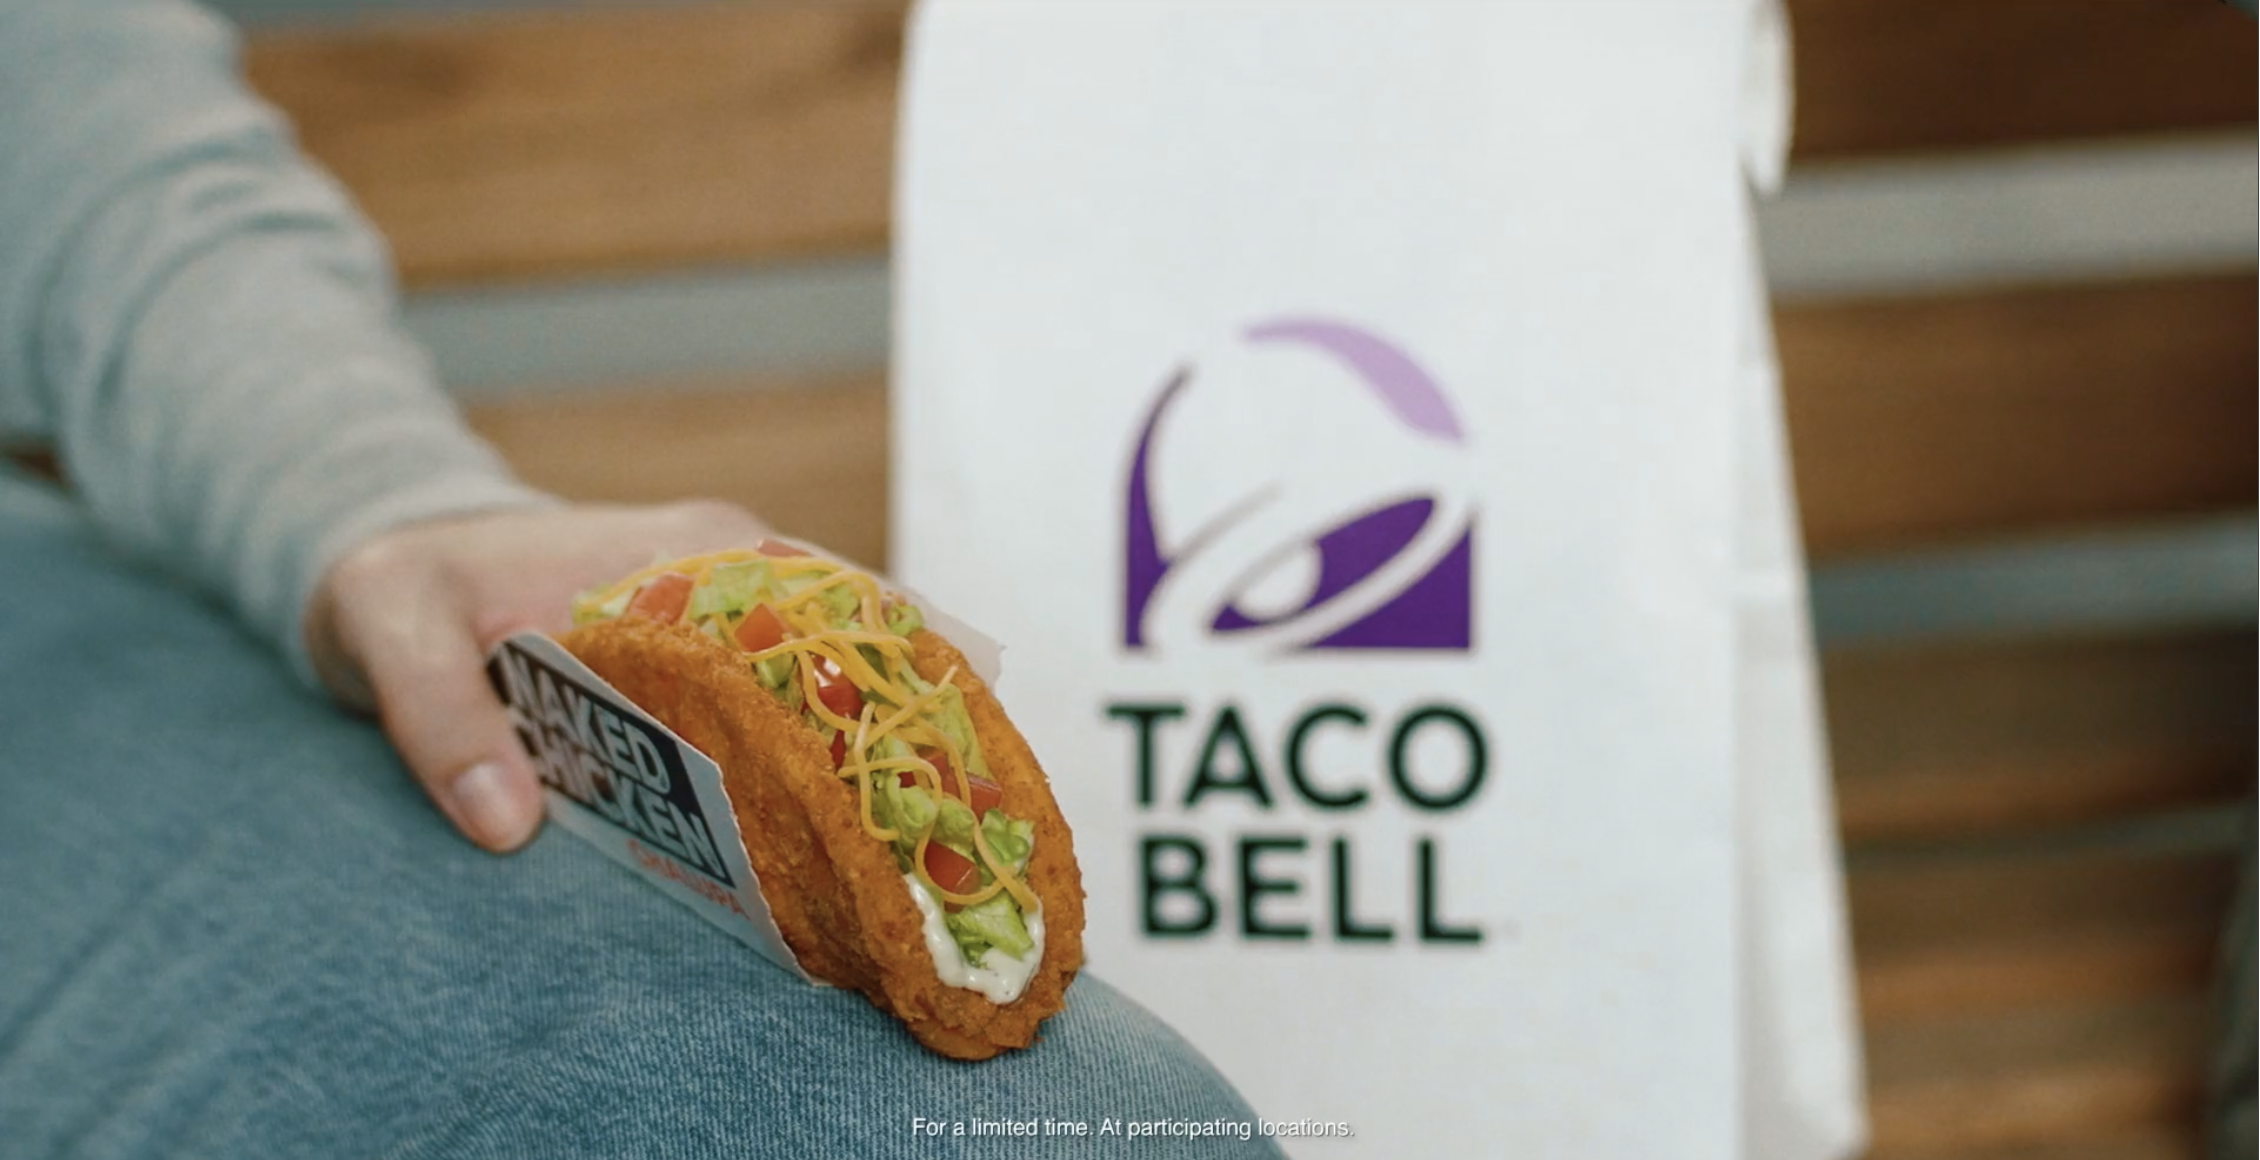   TACO BELL: NAKED CHICKEN CHALUPA  